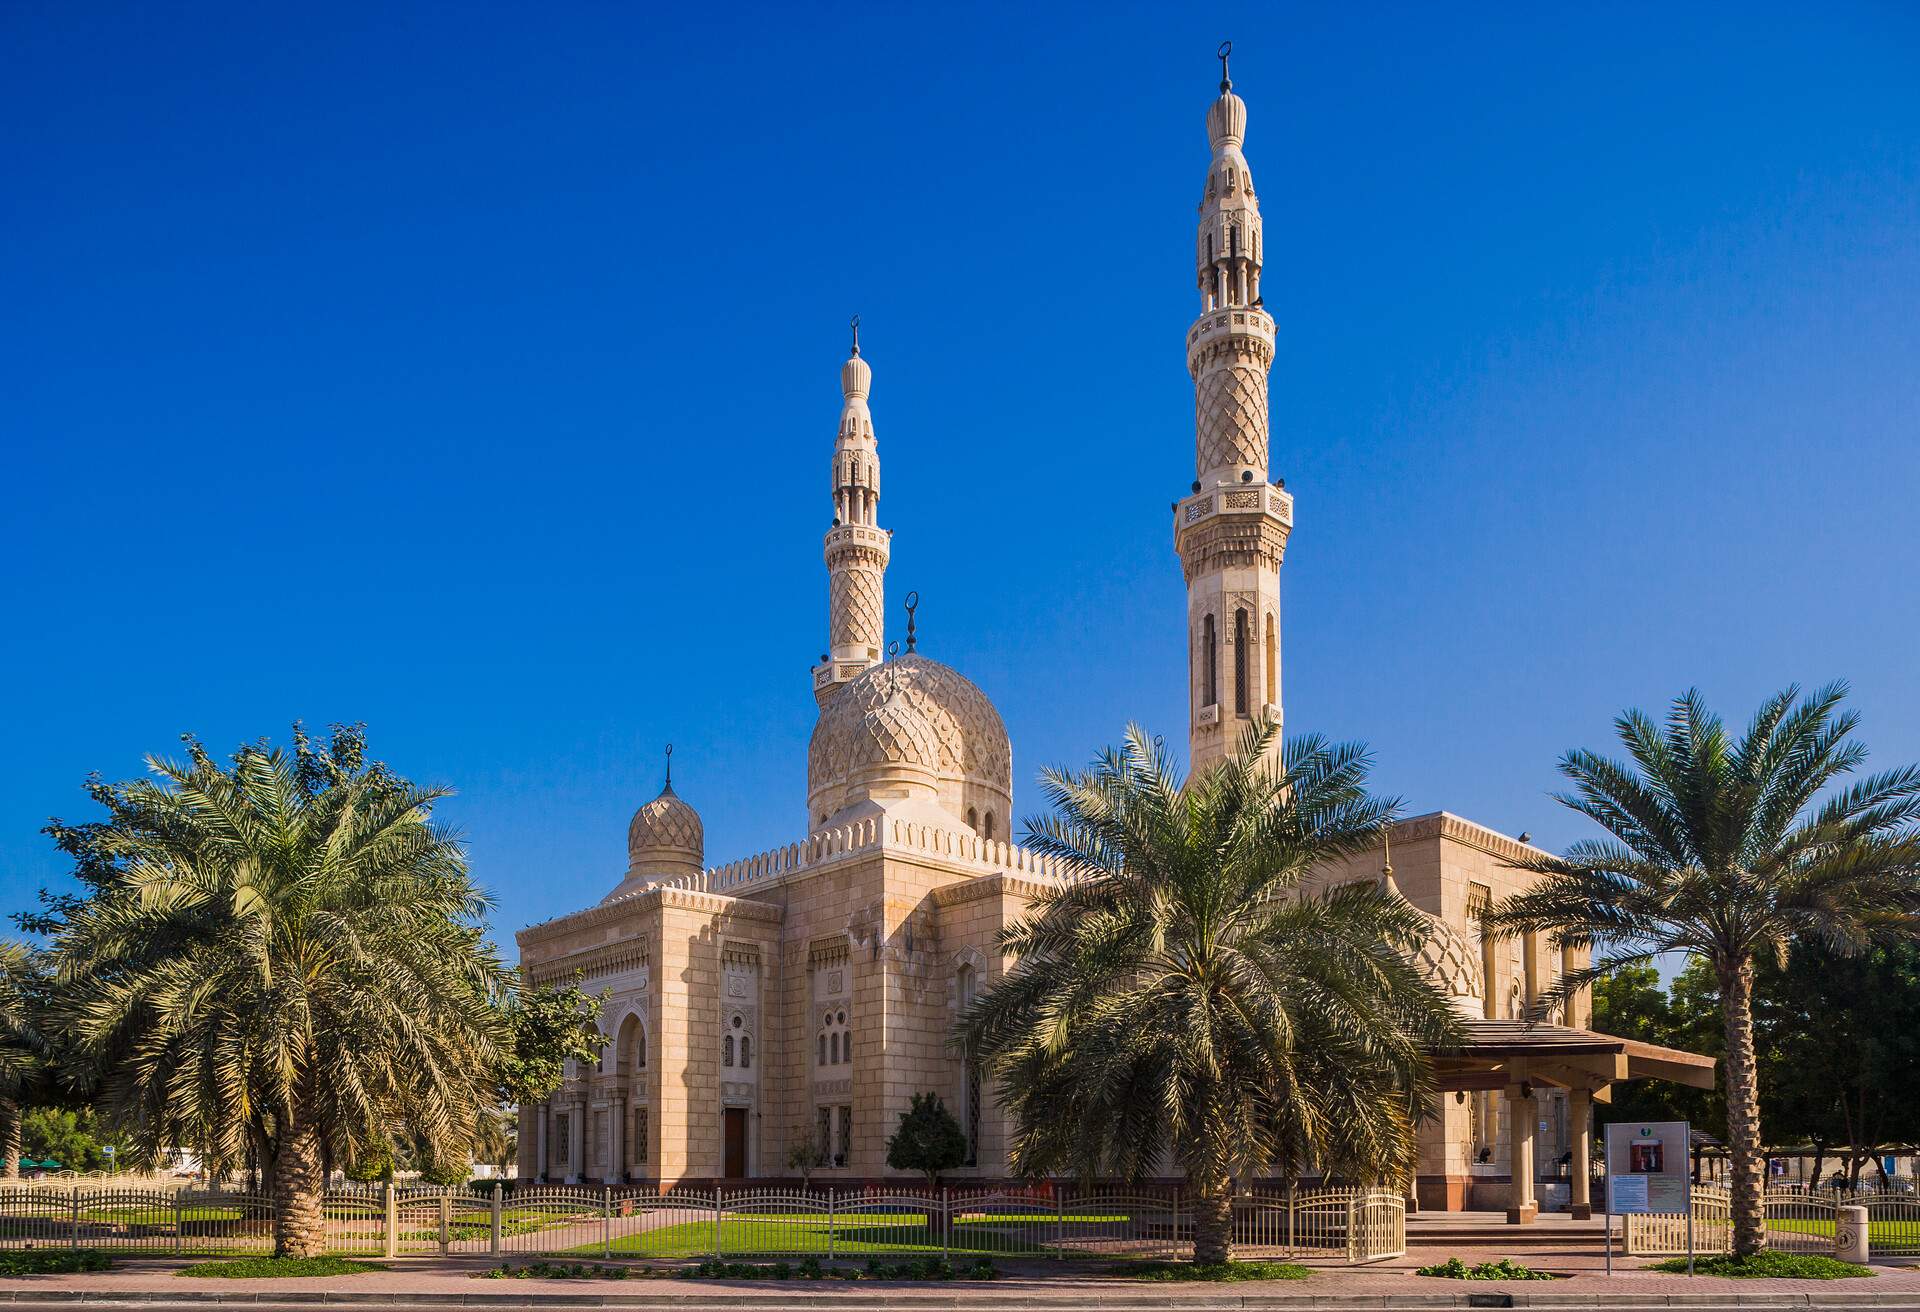 The exquisite Jumeirah Mosque with its two minarets stretching into the deep blue sky.